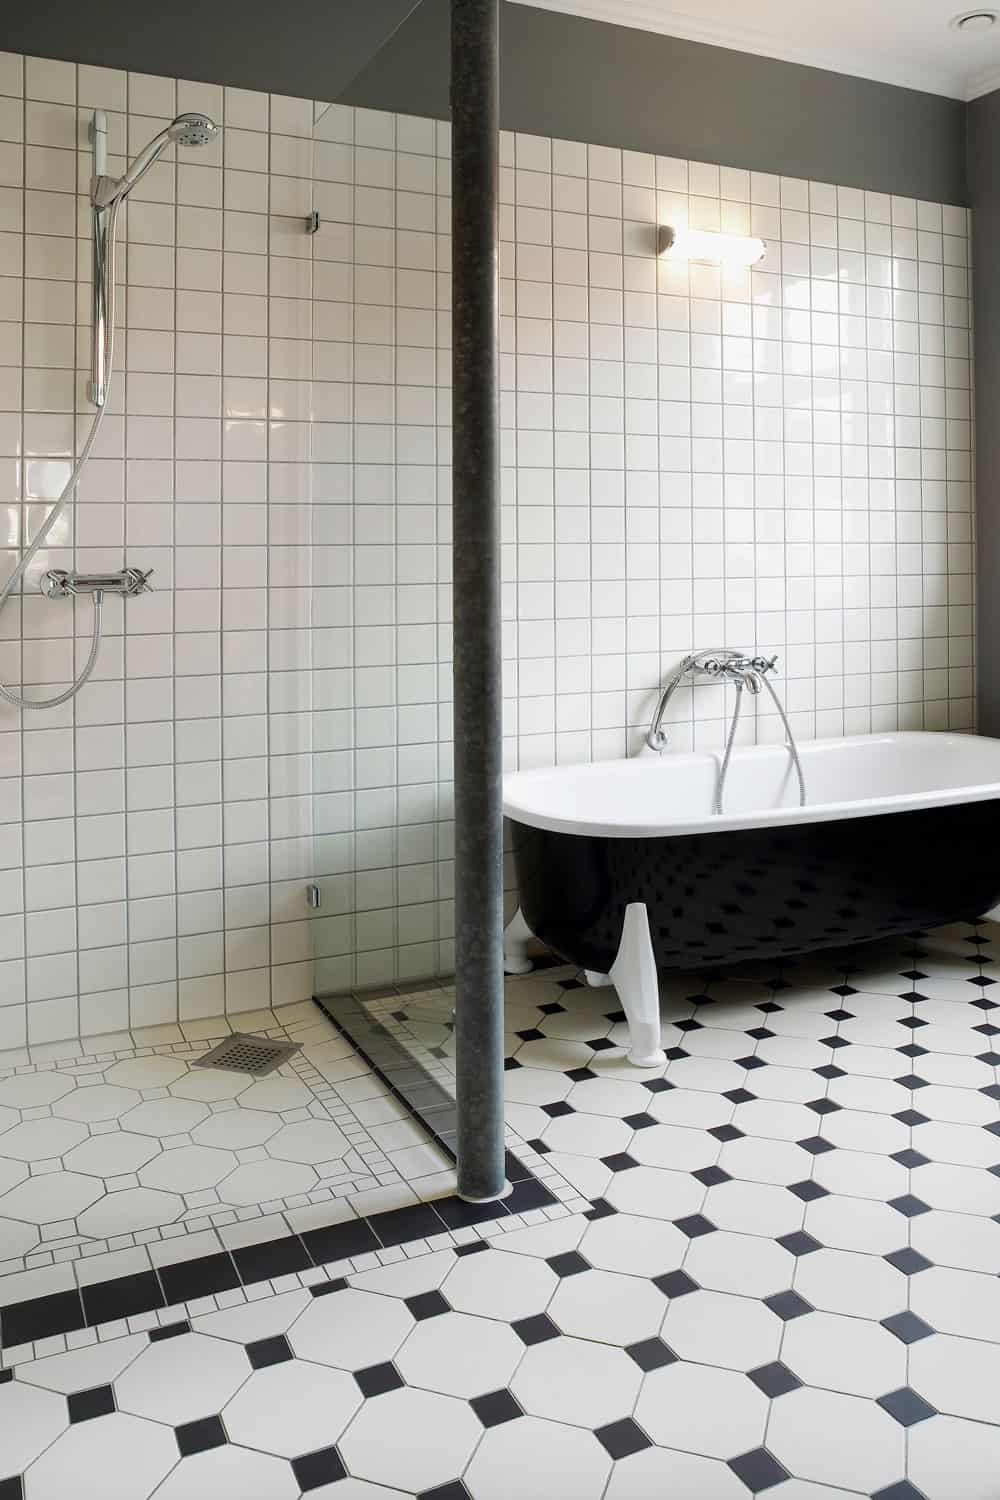 Totally renovated bathroom with shower cabin and bathtub,light cream coloured tiles on floor and wall, Should You Tile The Floor Or Walls First In A Shower?